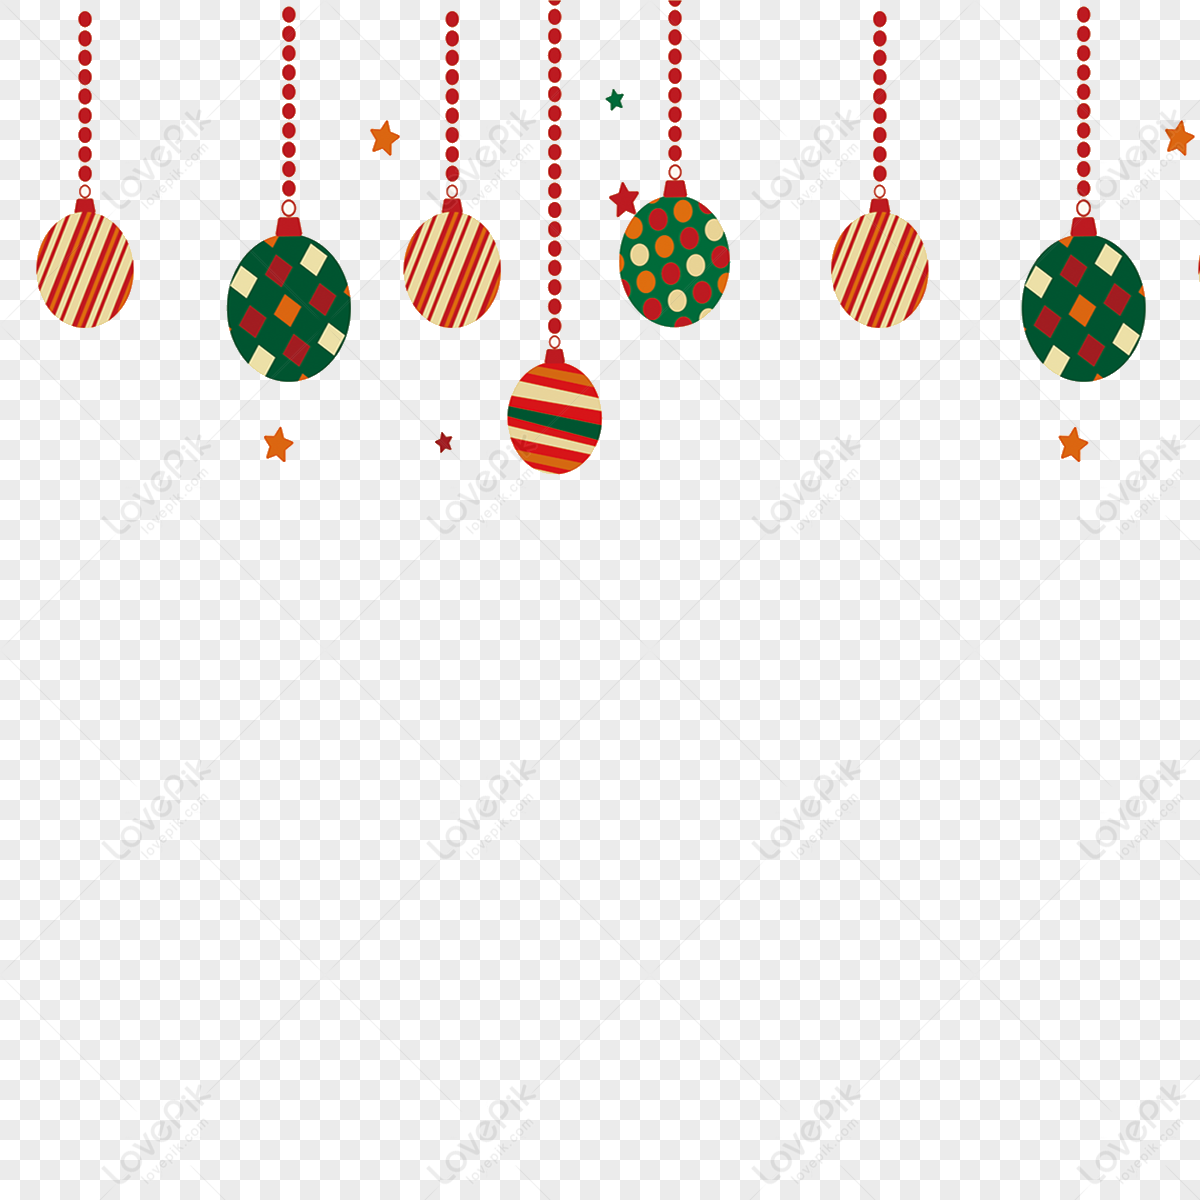 A Hanging Color Ball, Colorful Patterns, Christmas Patterns, Material PNG  Transparent Background And Clipart Image For Free Download - Lovepik